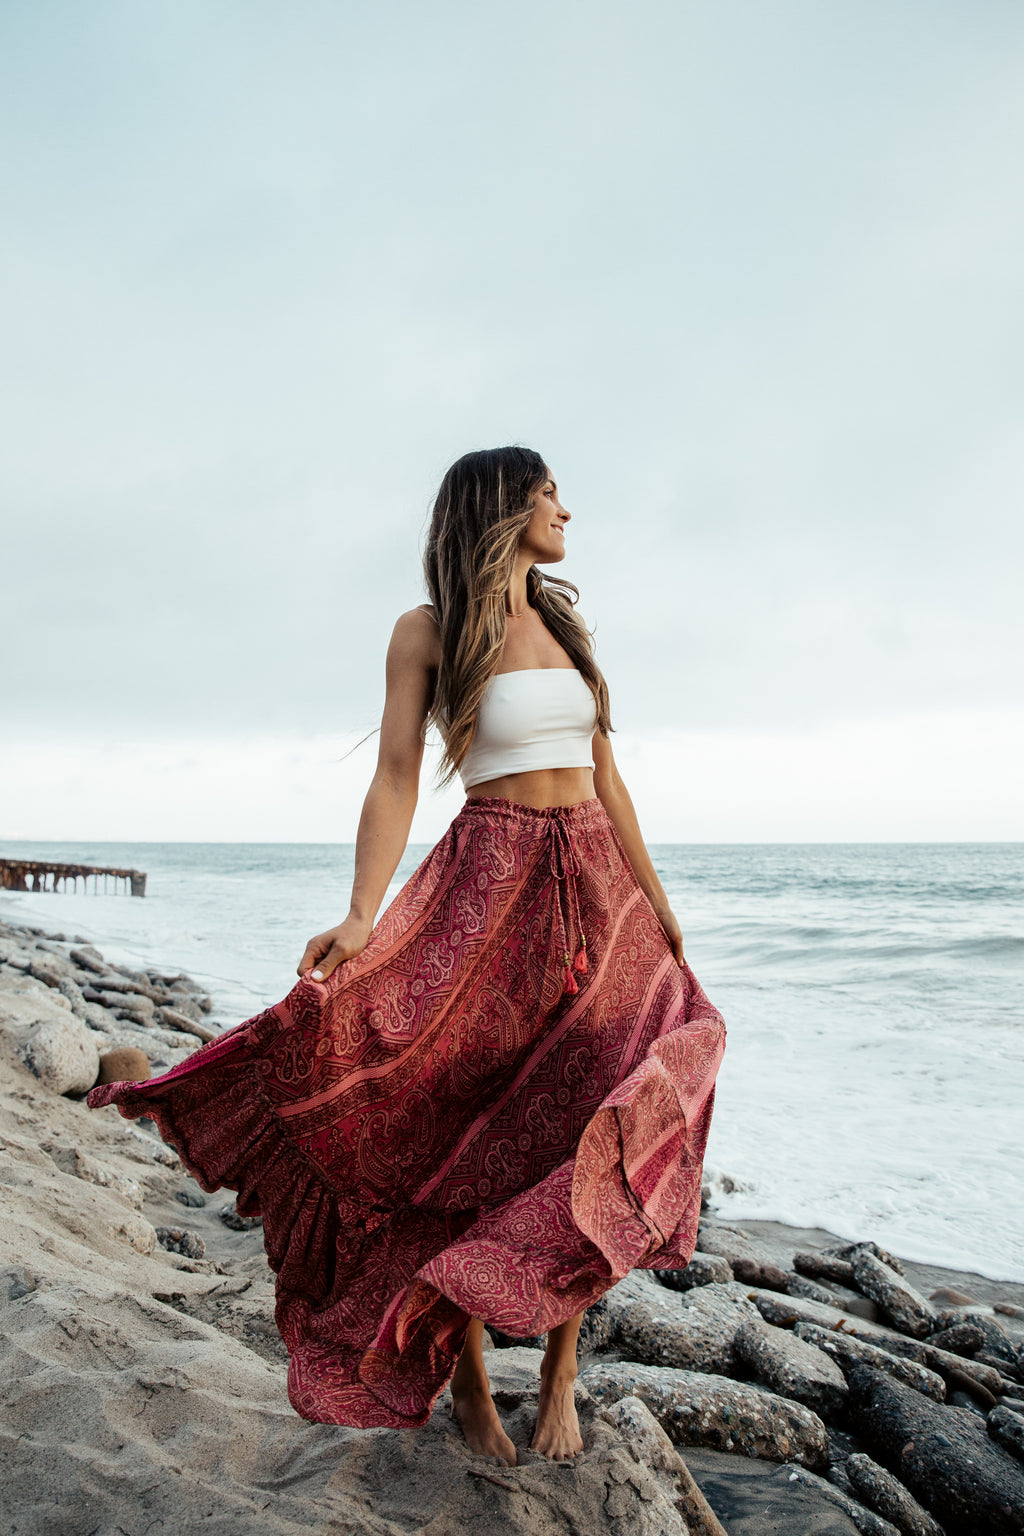 Colombian Sunsets Maxi Skirt - Appelov